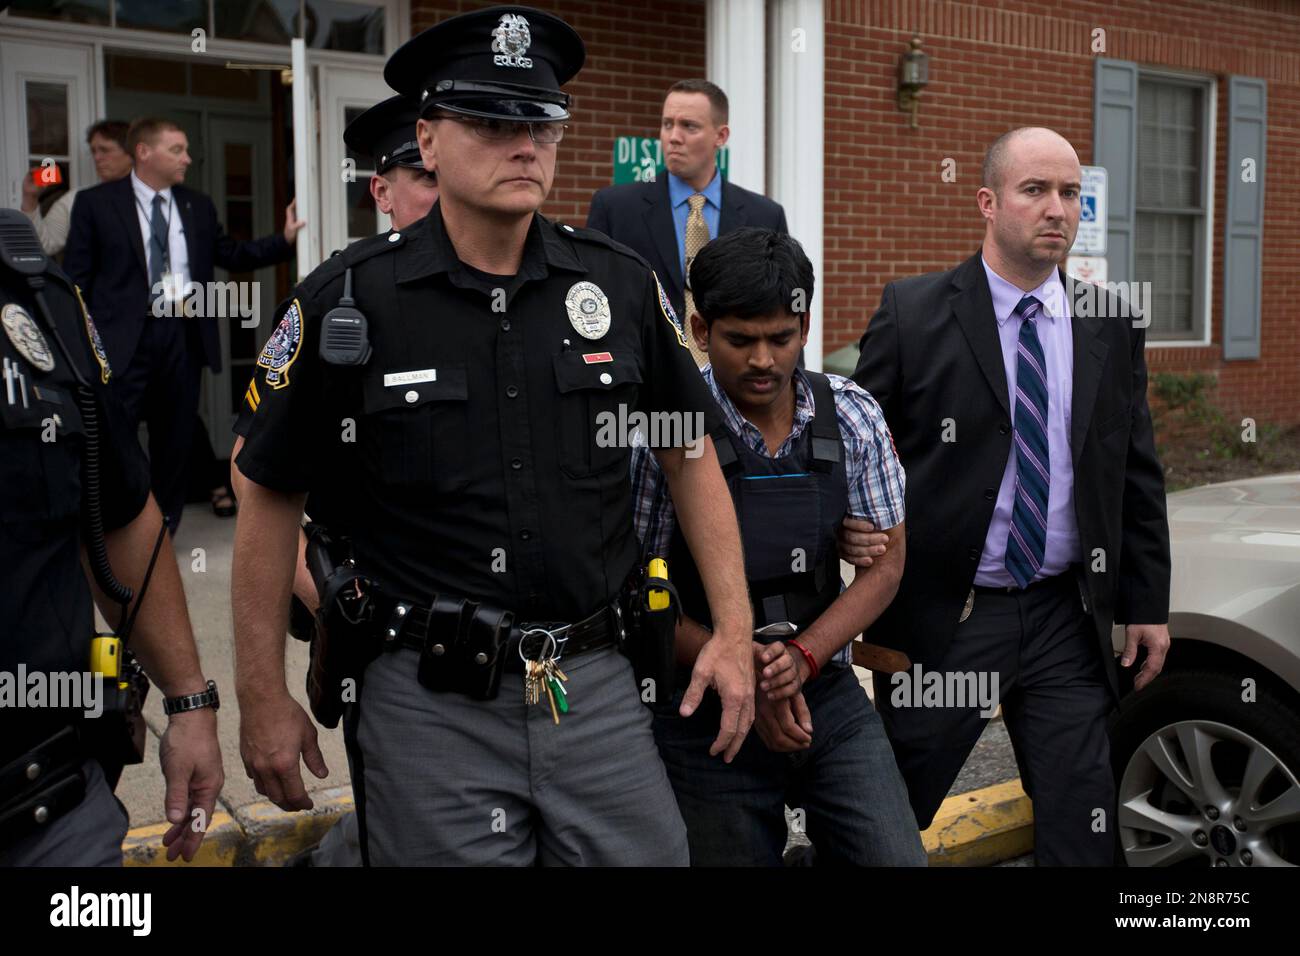 Raghunandan Yandamuri is escorted from a Montgomery County district court after an arraignment Friday, Oct. 26, 2012, in Bridgeport, Pa. Investigators said Yandamuri killed 10-month-old Saanvi Venna and her grandmother Satyavathi Venna in a botched ransom kidnapping. He is being held without bail on murder, kidnapping and other charges. (AP Photo/Matt Rourke) Stock Photo